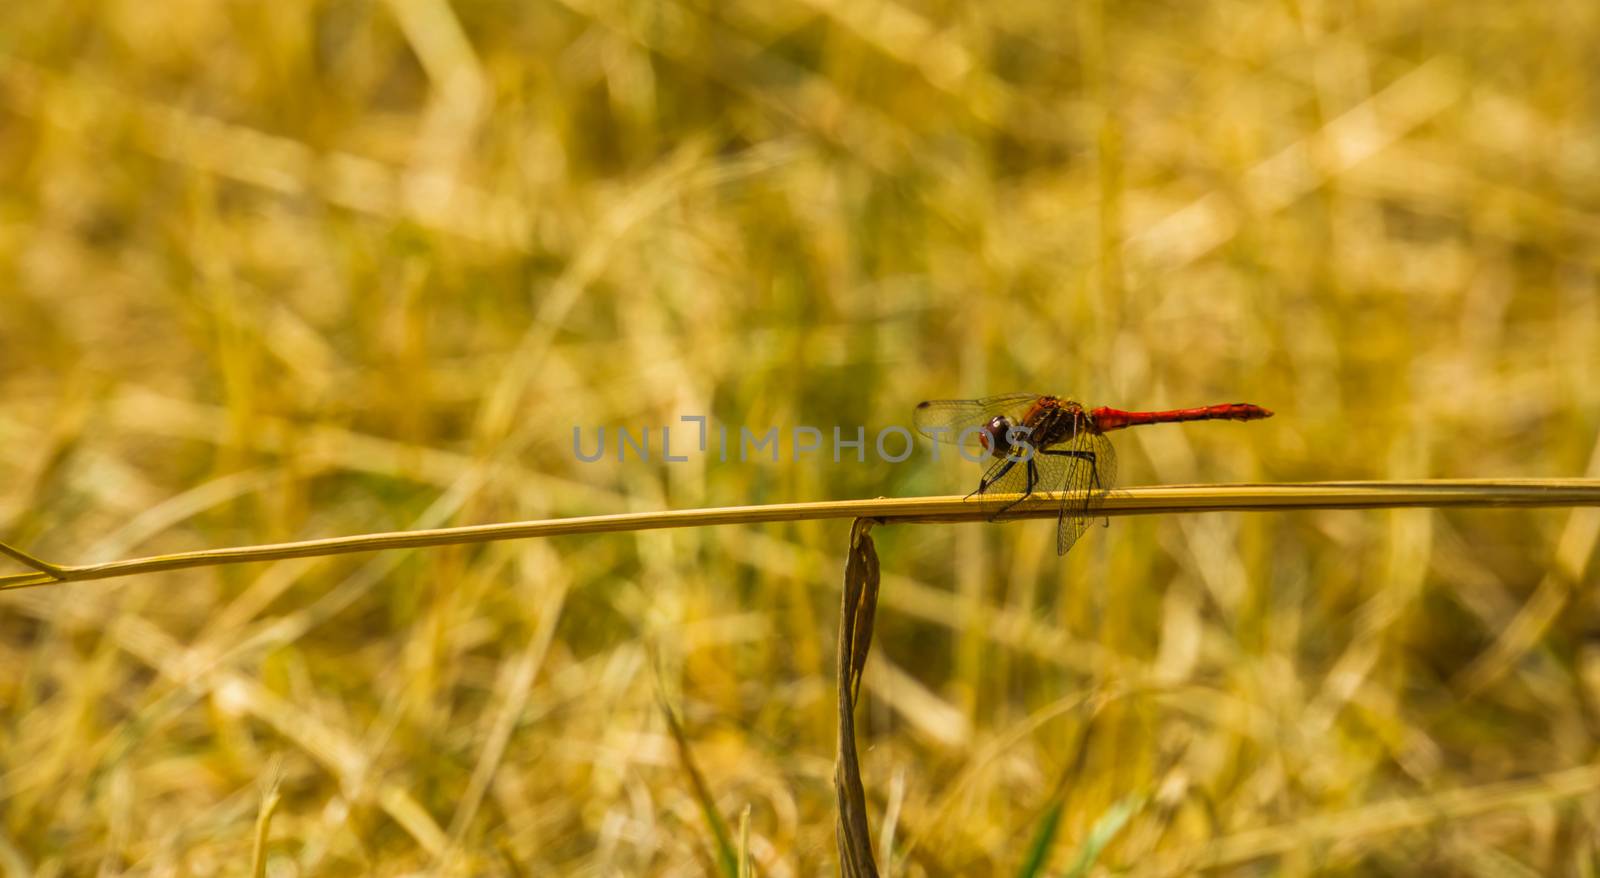 portrait of a ruddy darter sitting on a blade of grass, fire red dragonfly, common insect specie from Europe